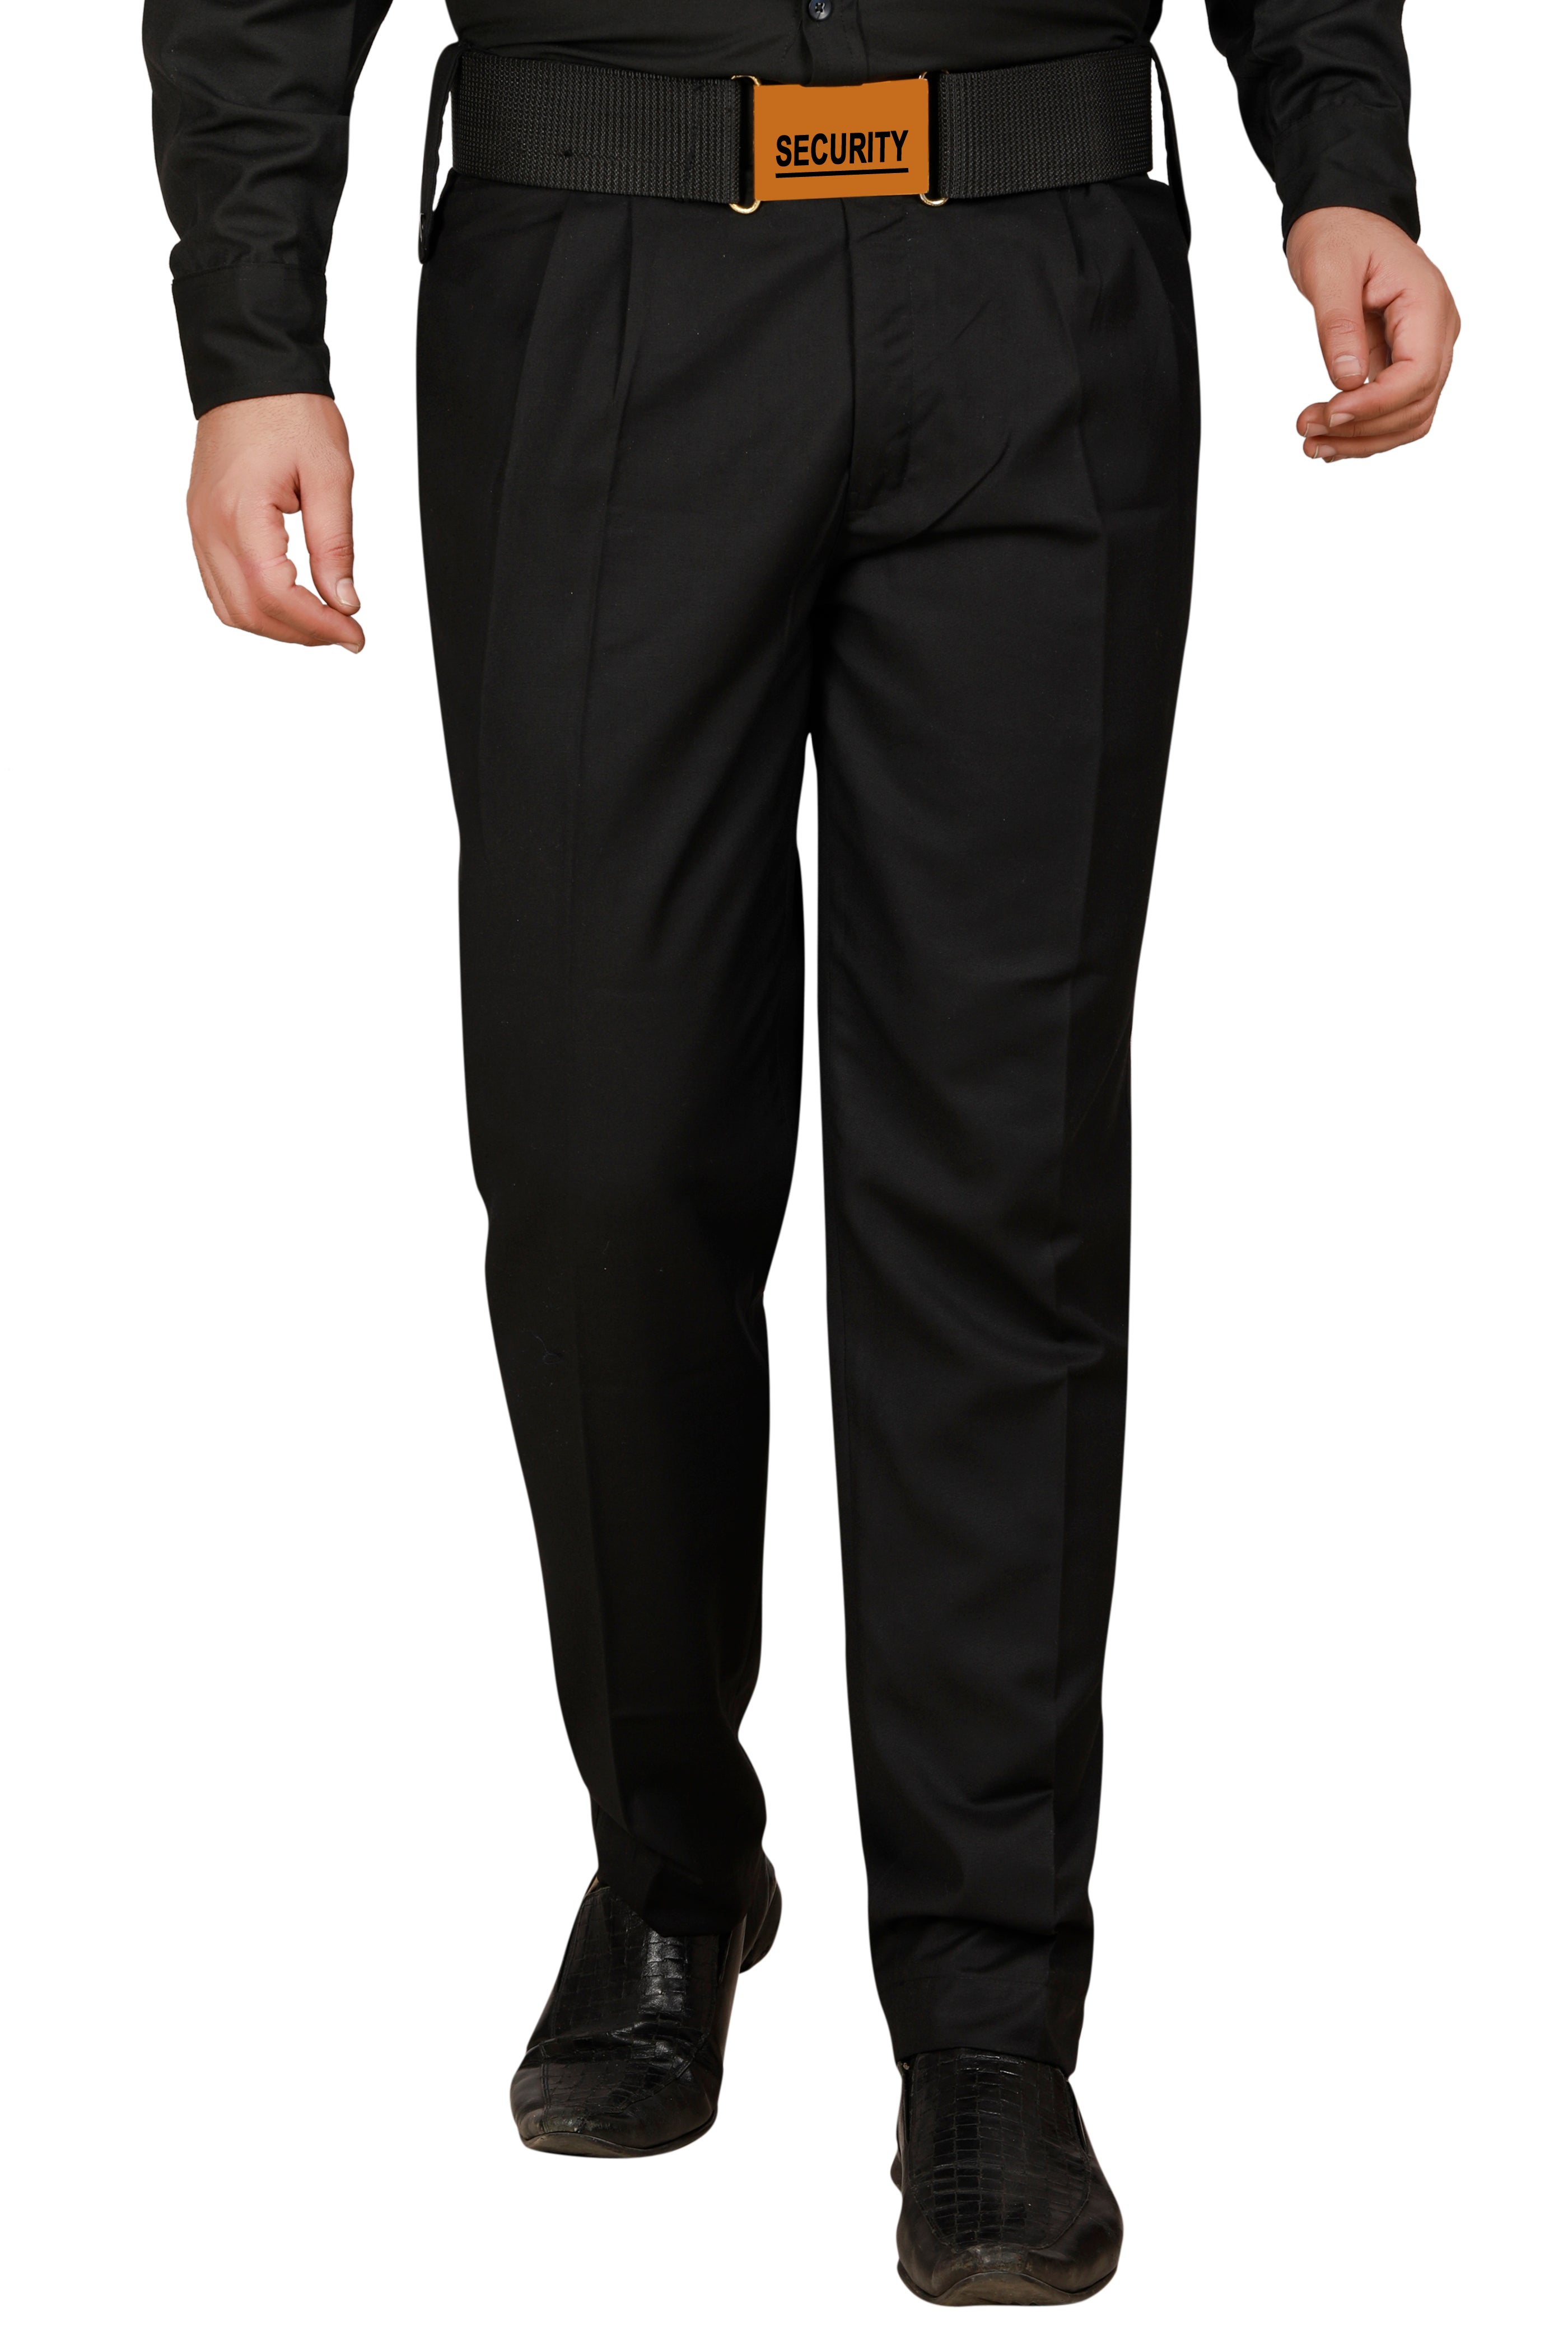 Bodyguards Security Pants for Safety and Confidence in Any